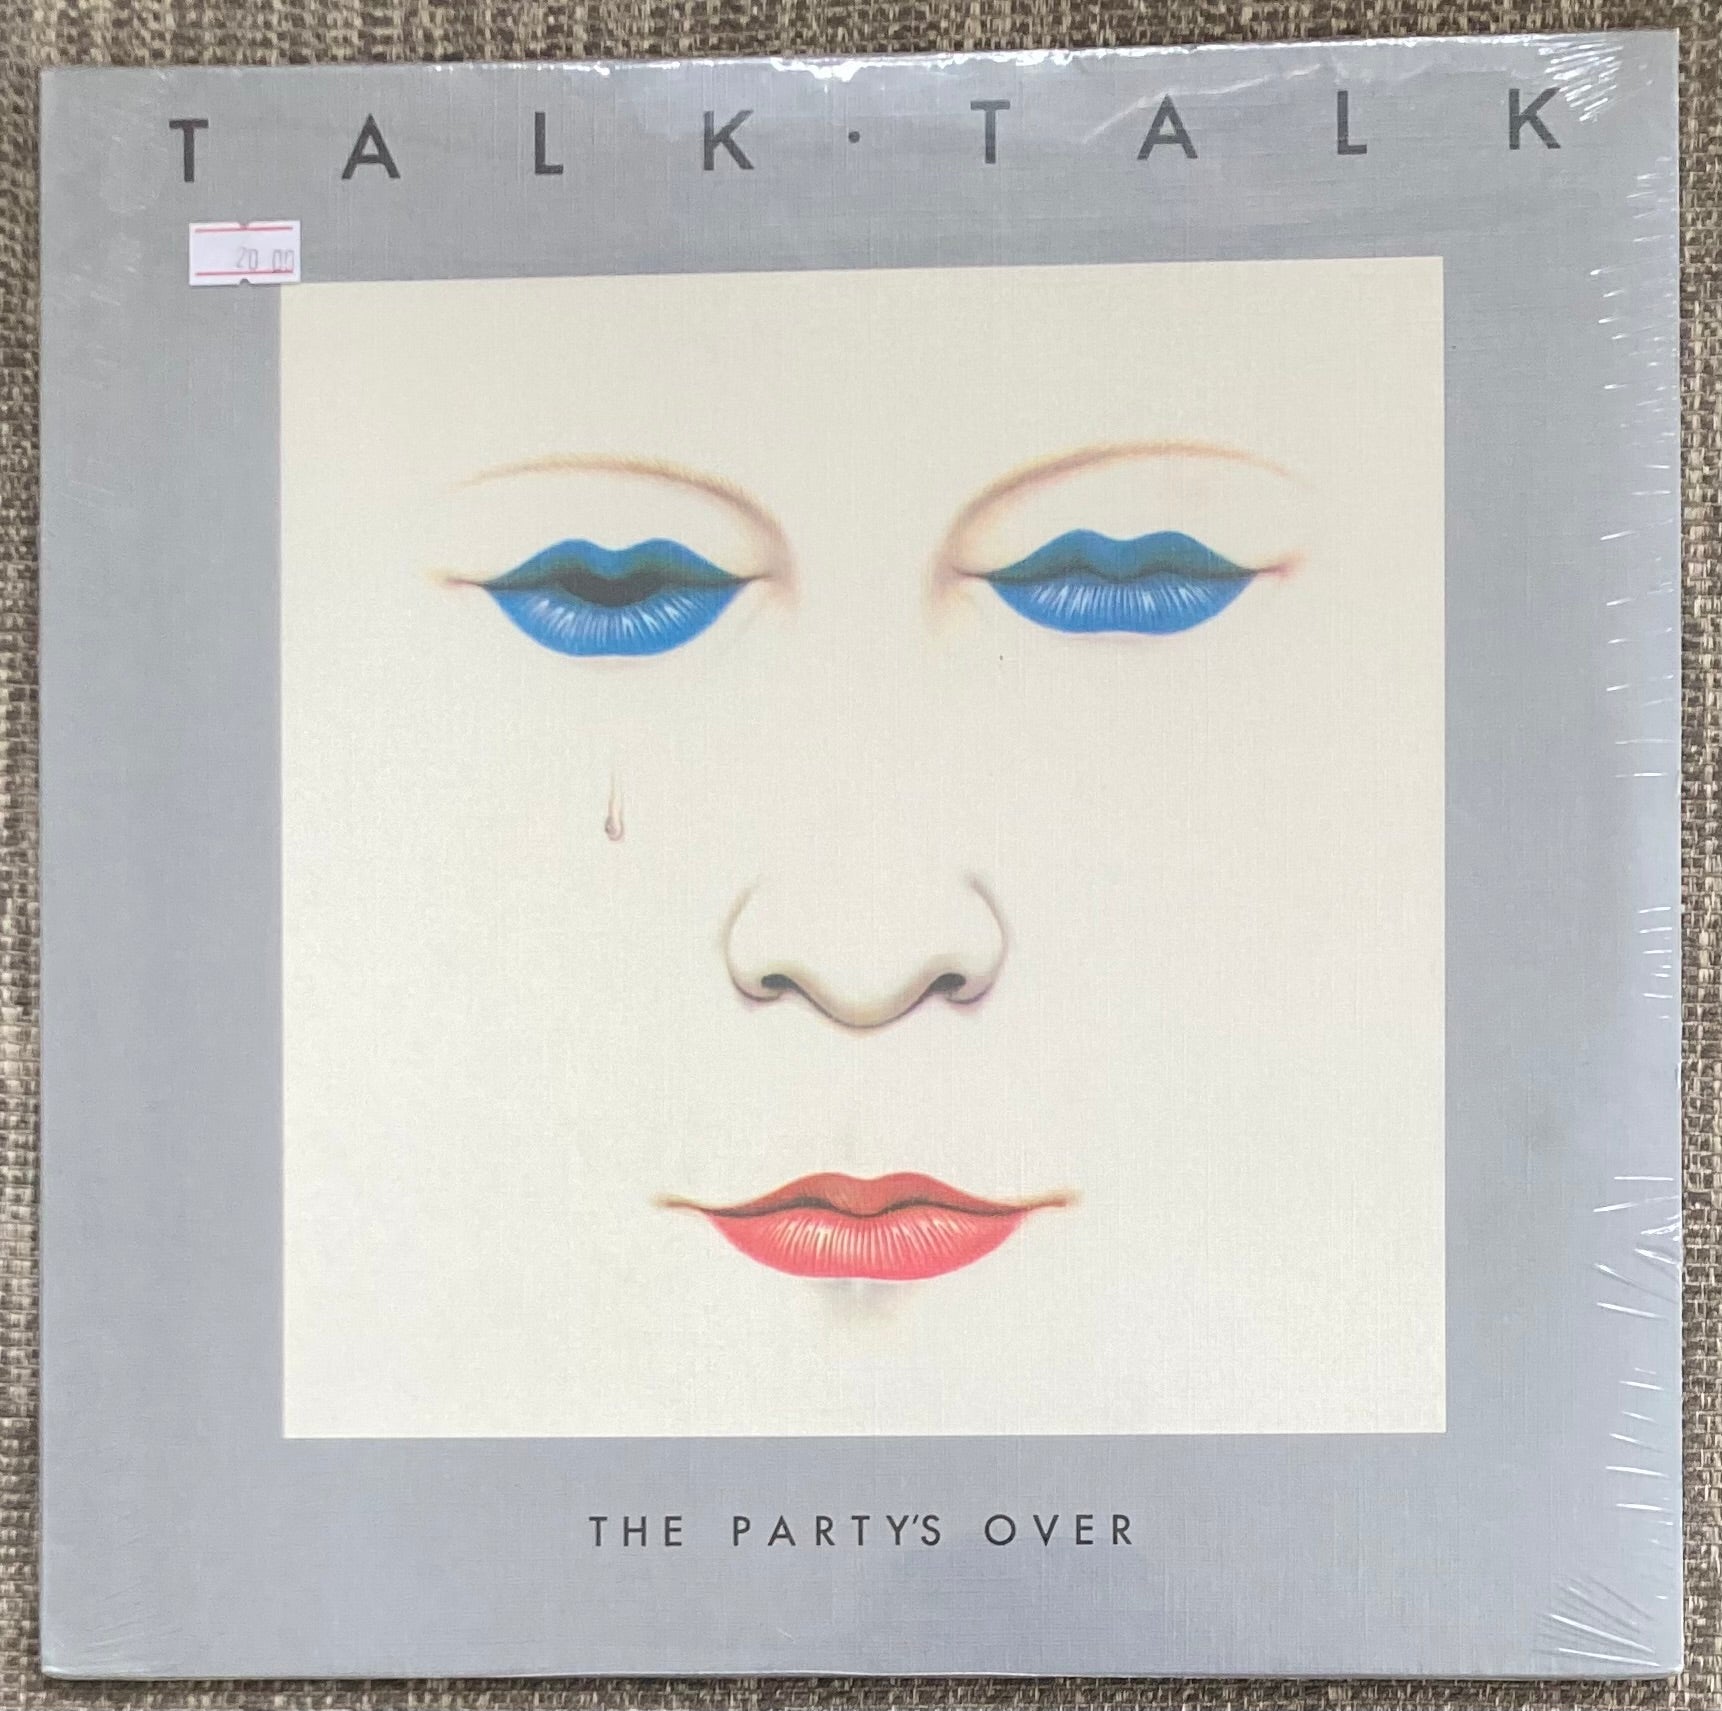 The front of 'Talk Talk - The Party's Over' on vinyl. It is brand new and sealed.